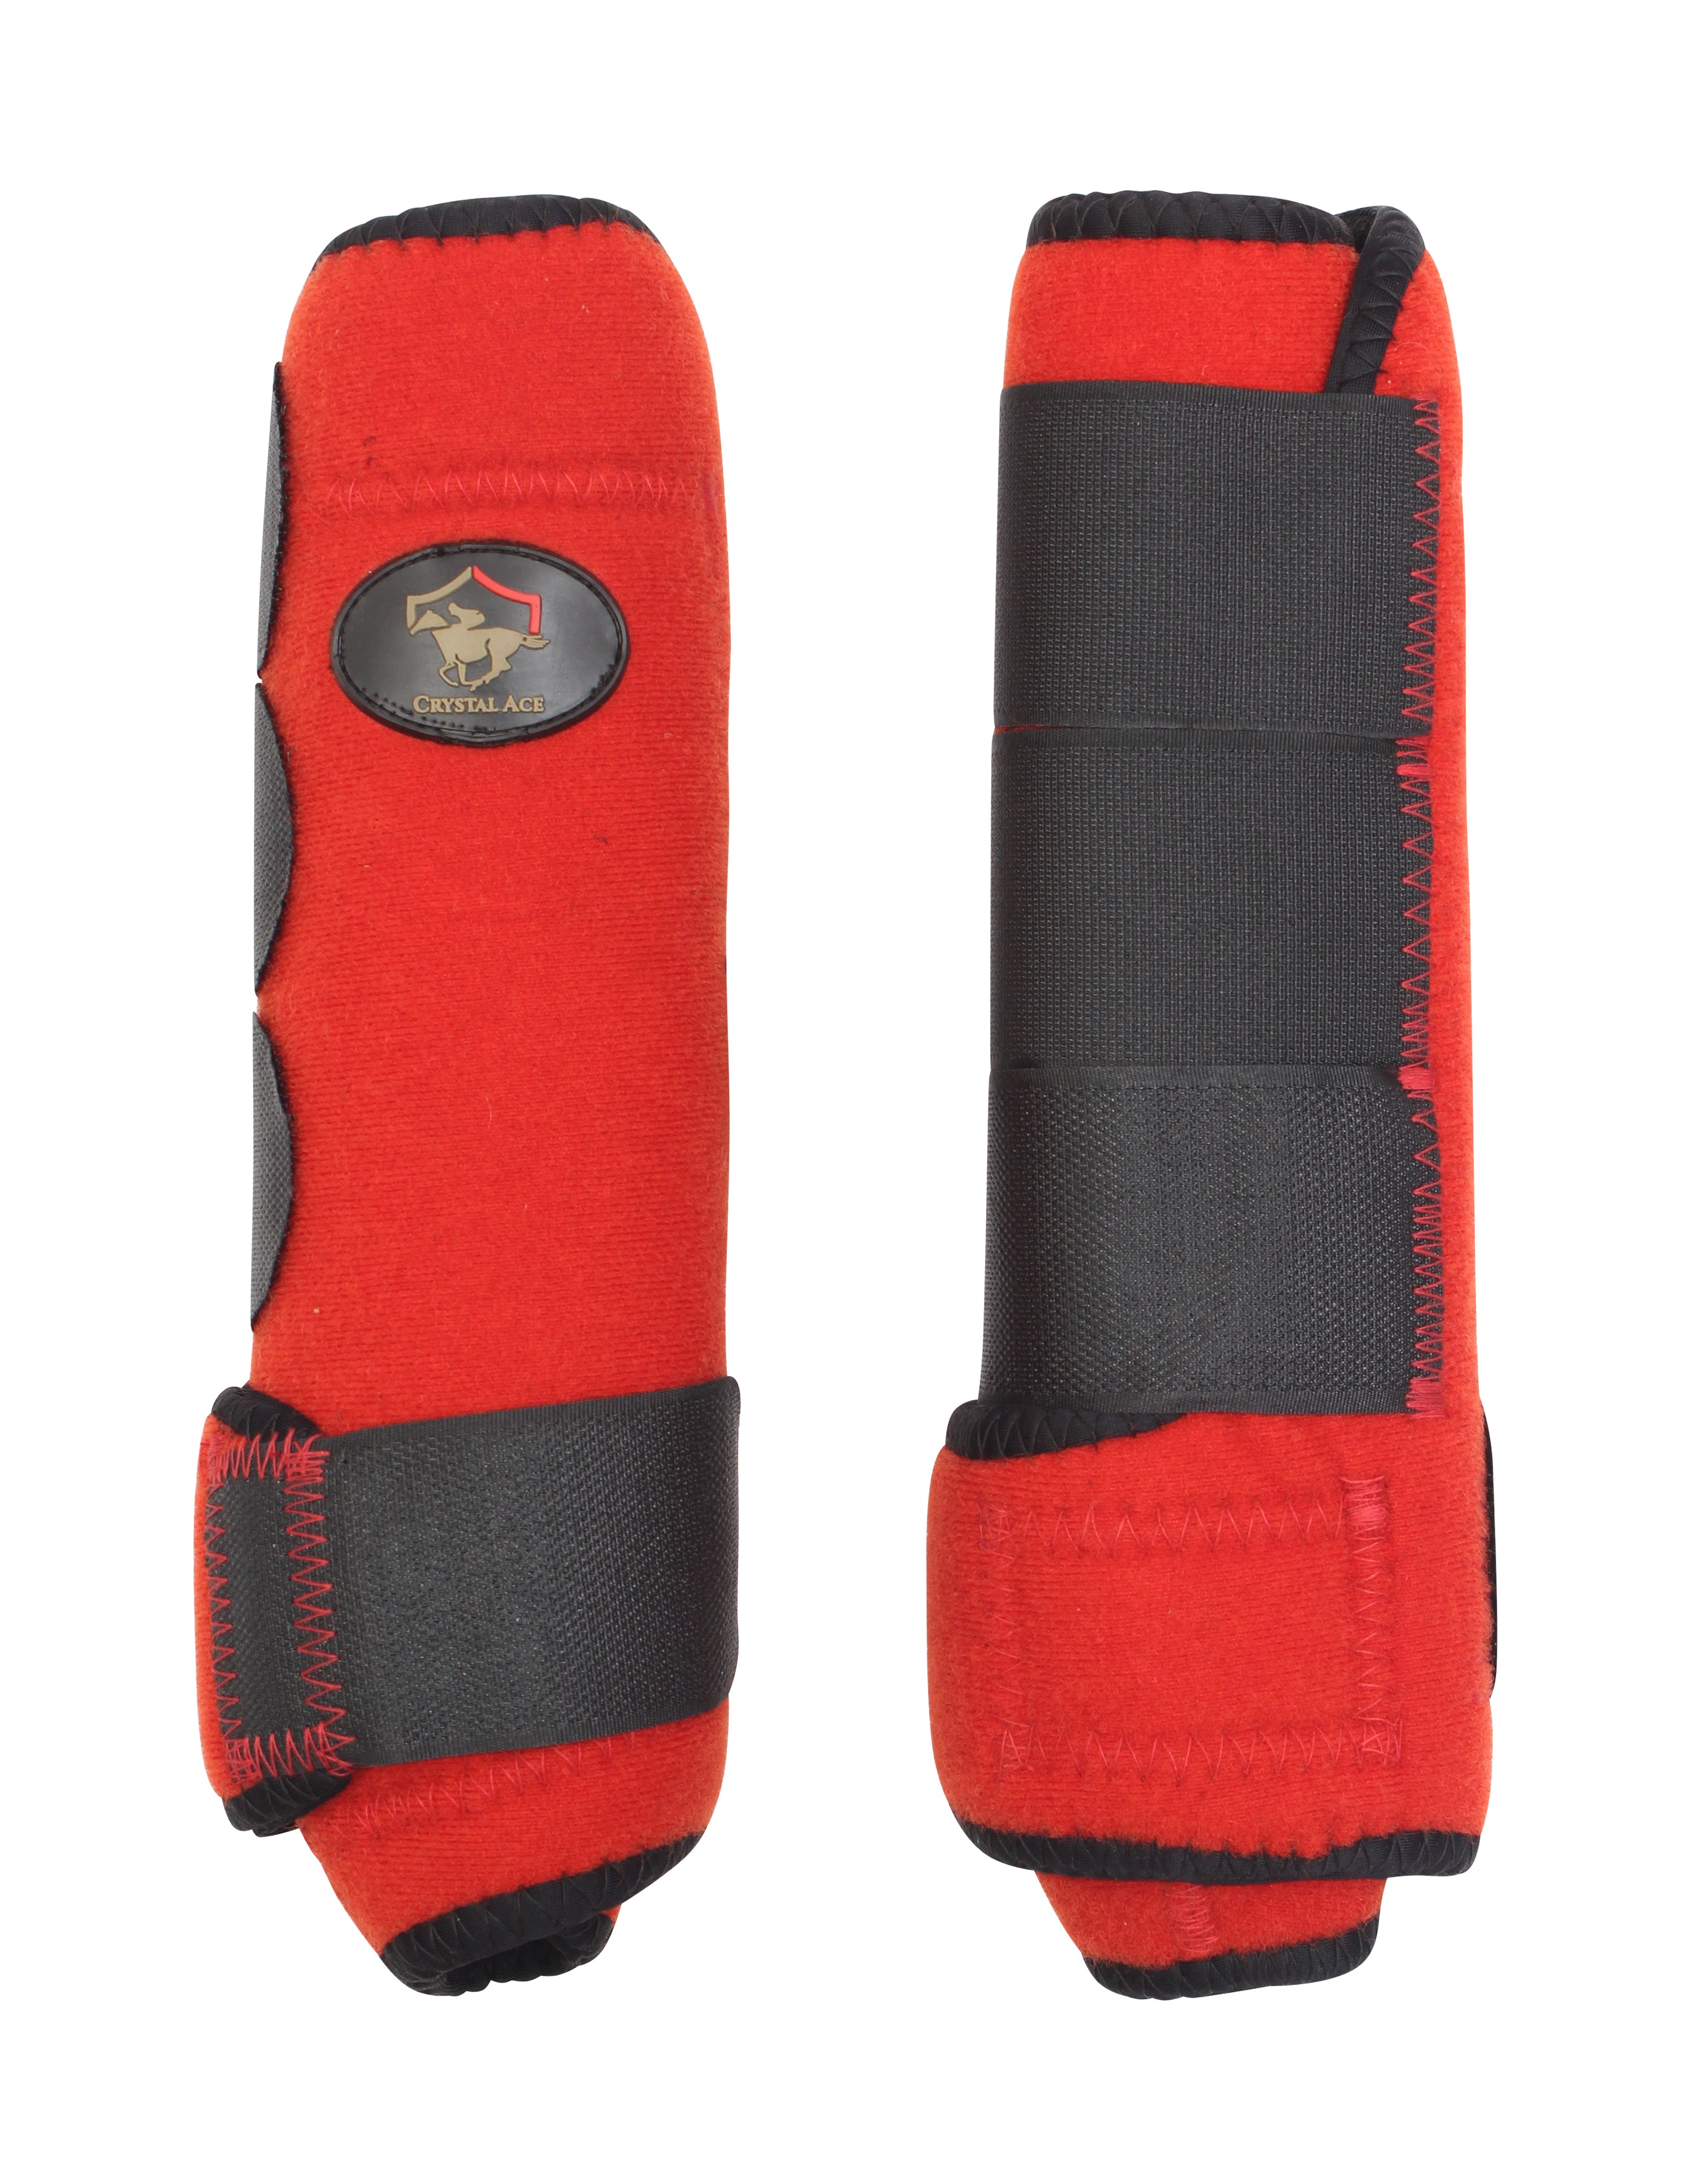 Horse Boot/Leg Wraps - Red